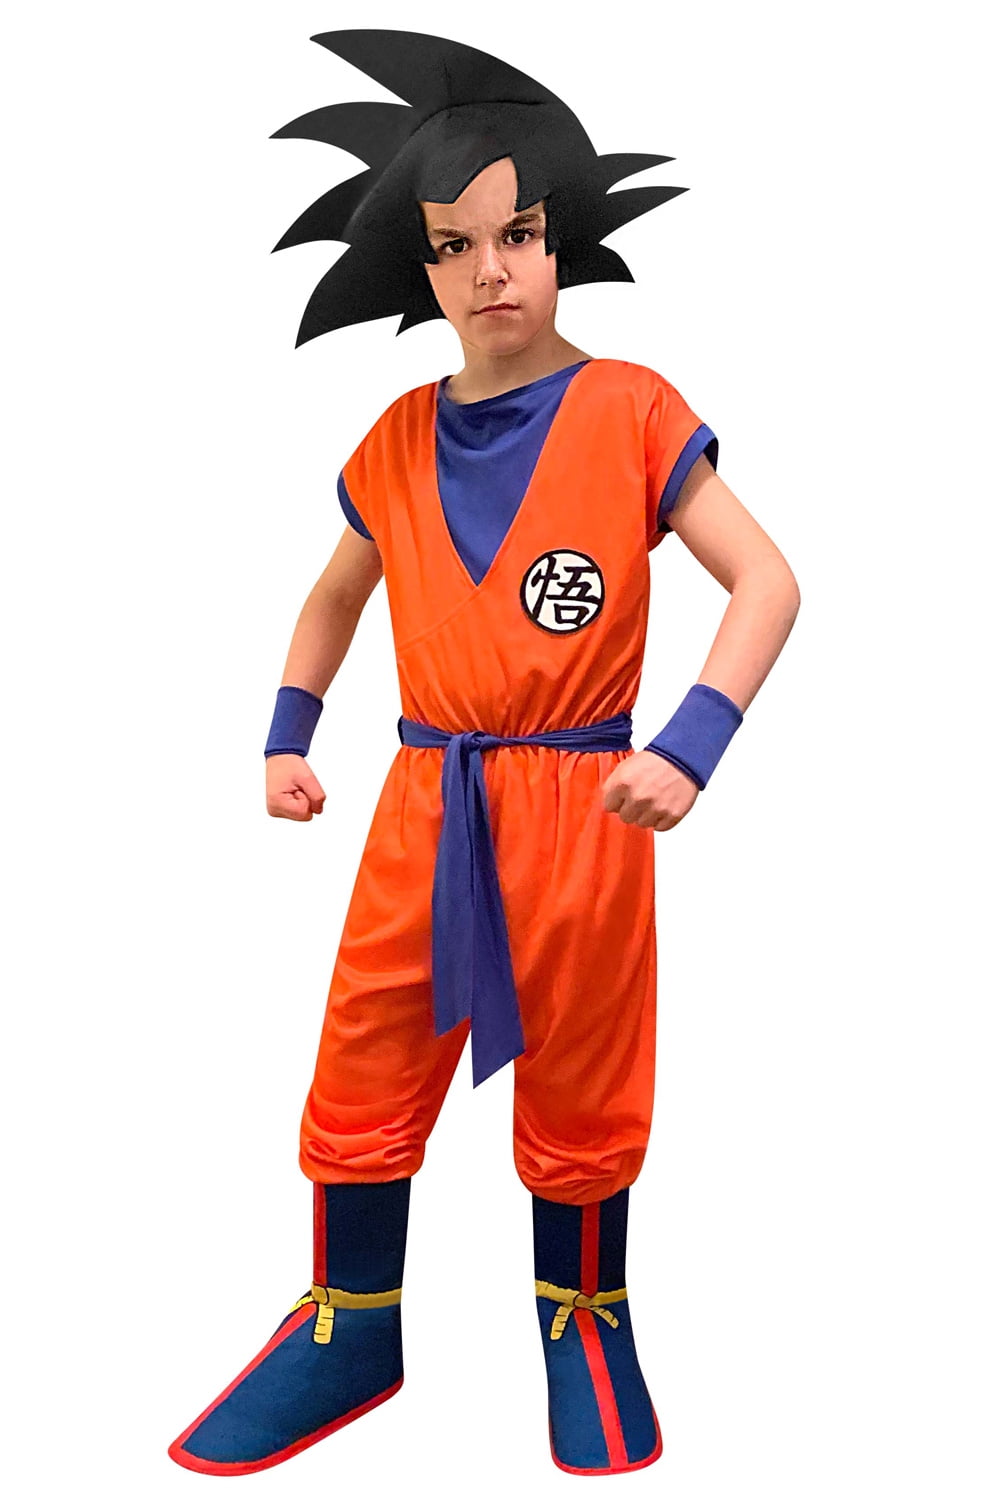 Baby Kids Boy Romper Jumpsuit Outfit Halloween Fancy Party Dragon Ball Costume 